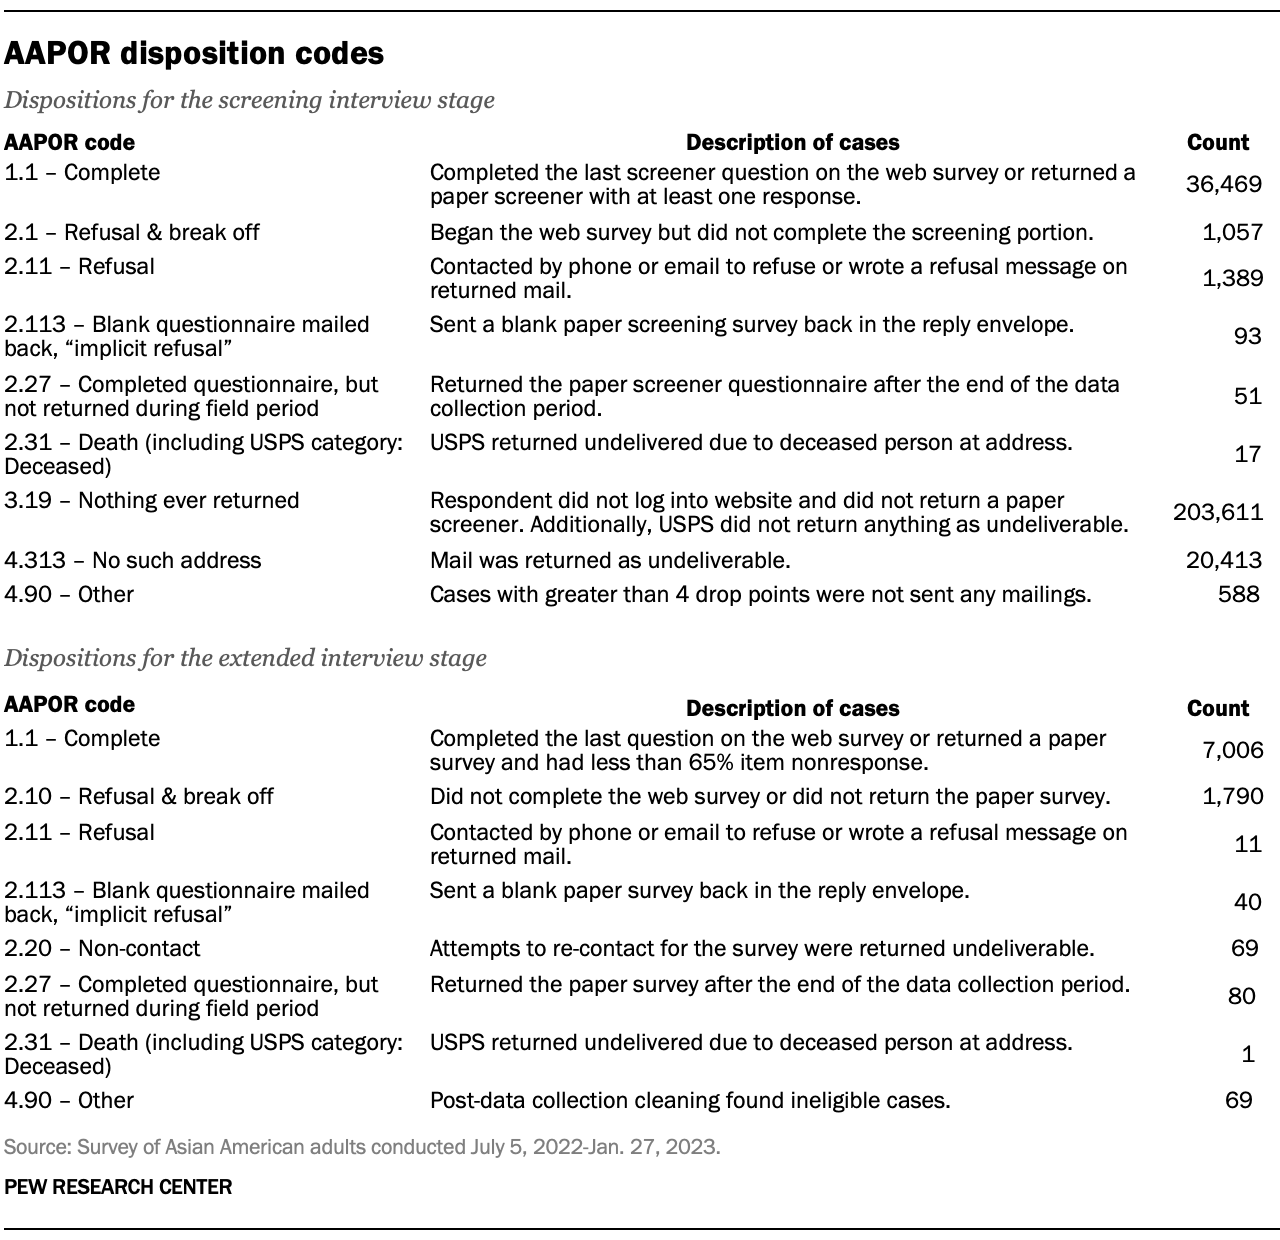 A table showing the AAPOR disposition codes by the number of respondents in the 2022-23 survey of Asian American adults.